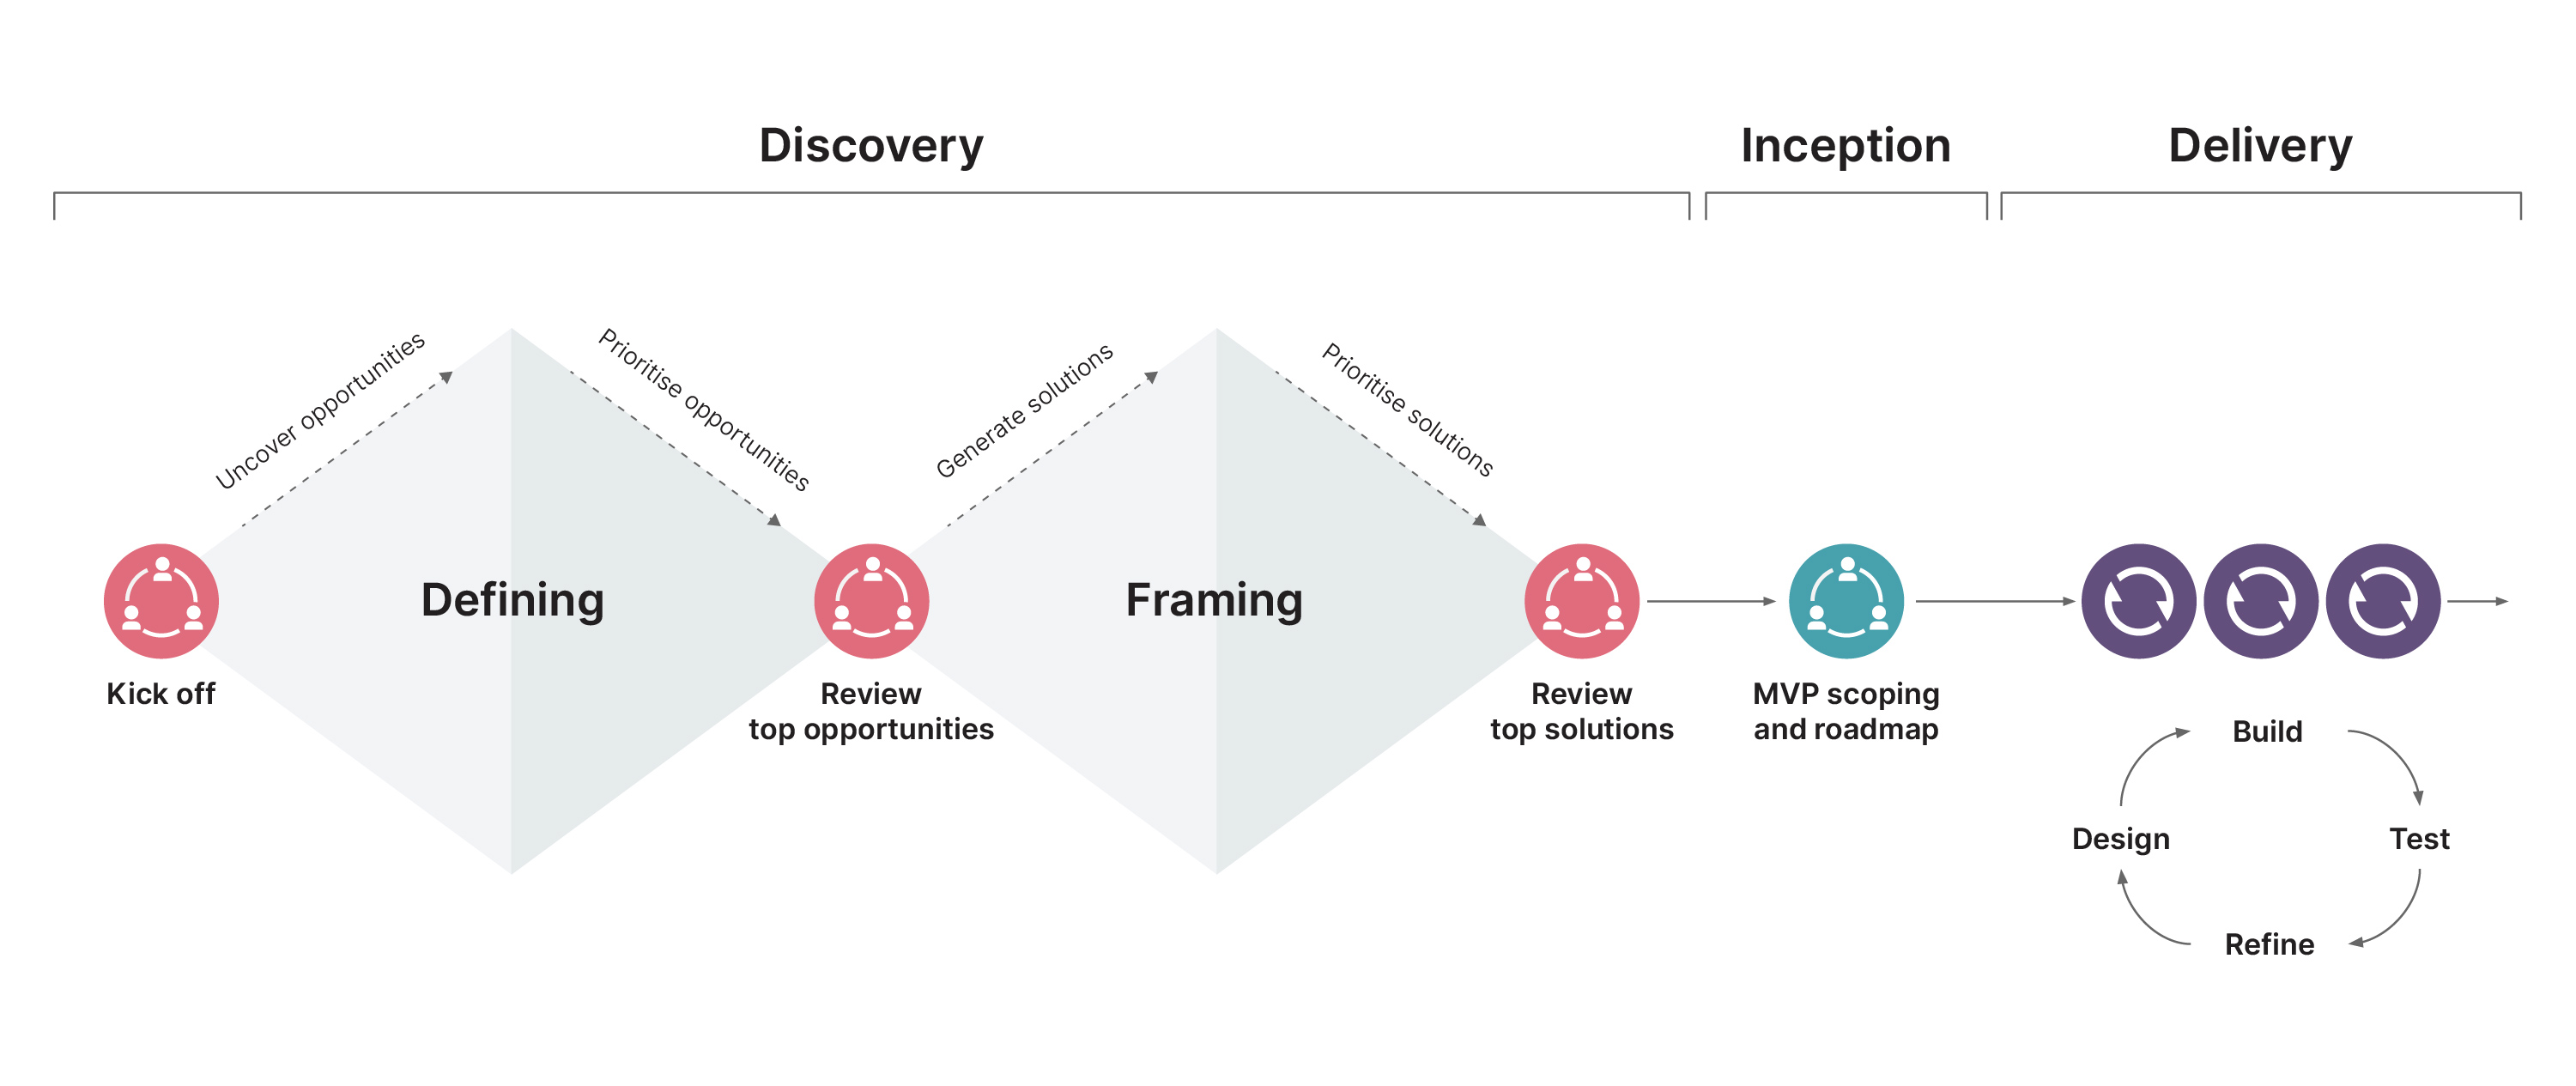 Discovery is about identifying problems/opportunities to align business goals with a product roadmap. Inception is about planning the solution delivery and implementation strategy.